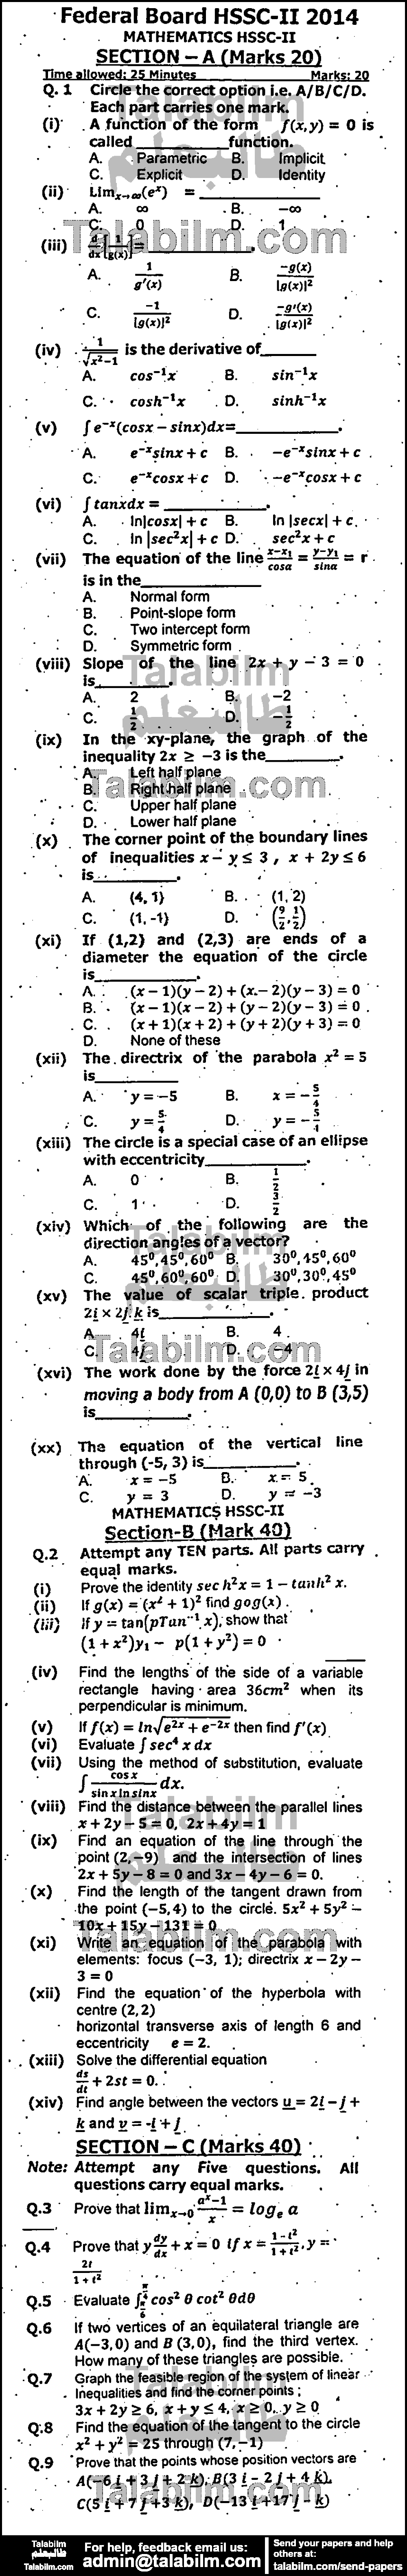 Math 0 past paper for Group-I 2014